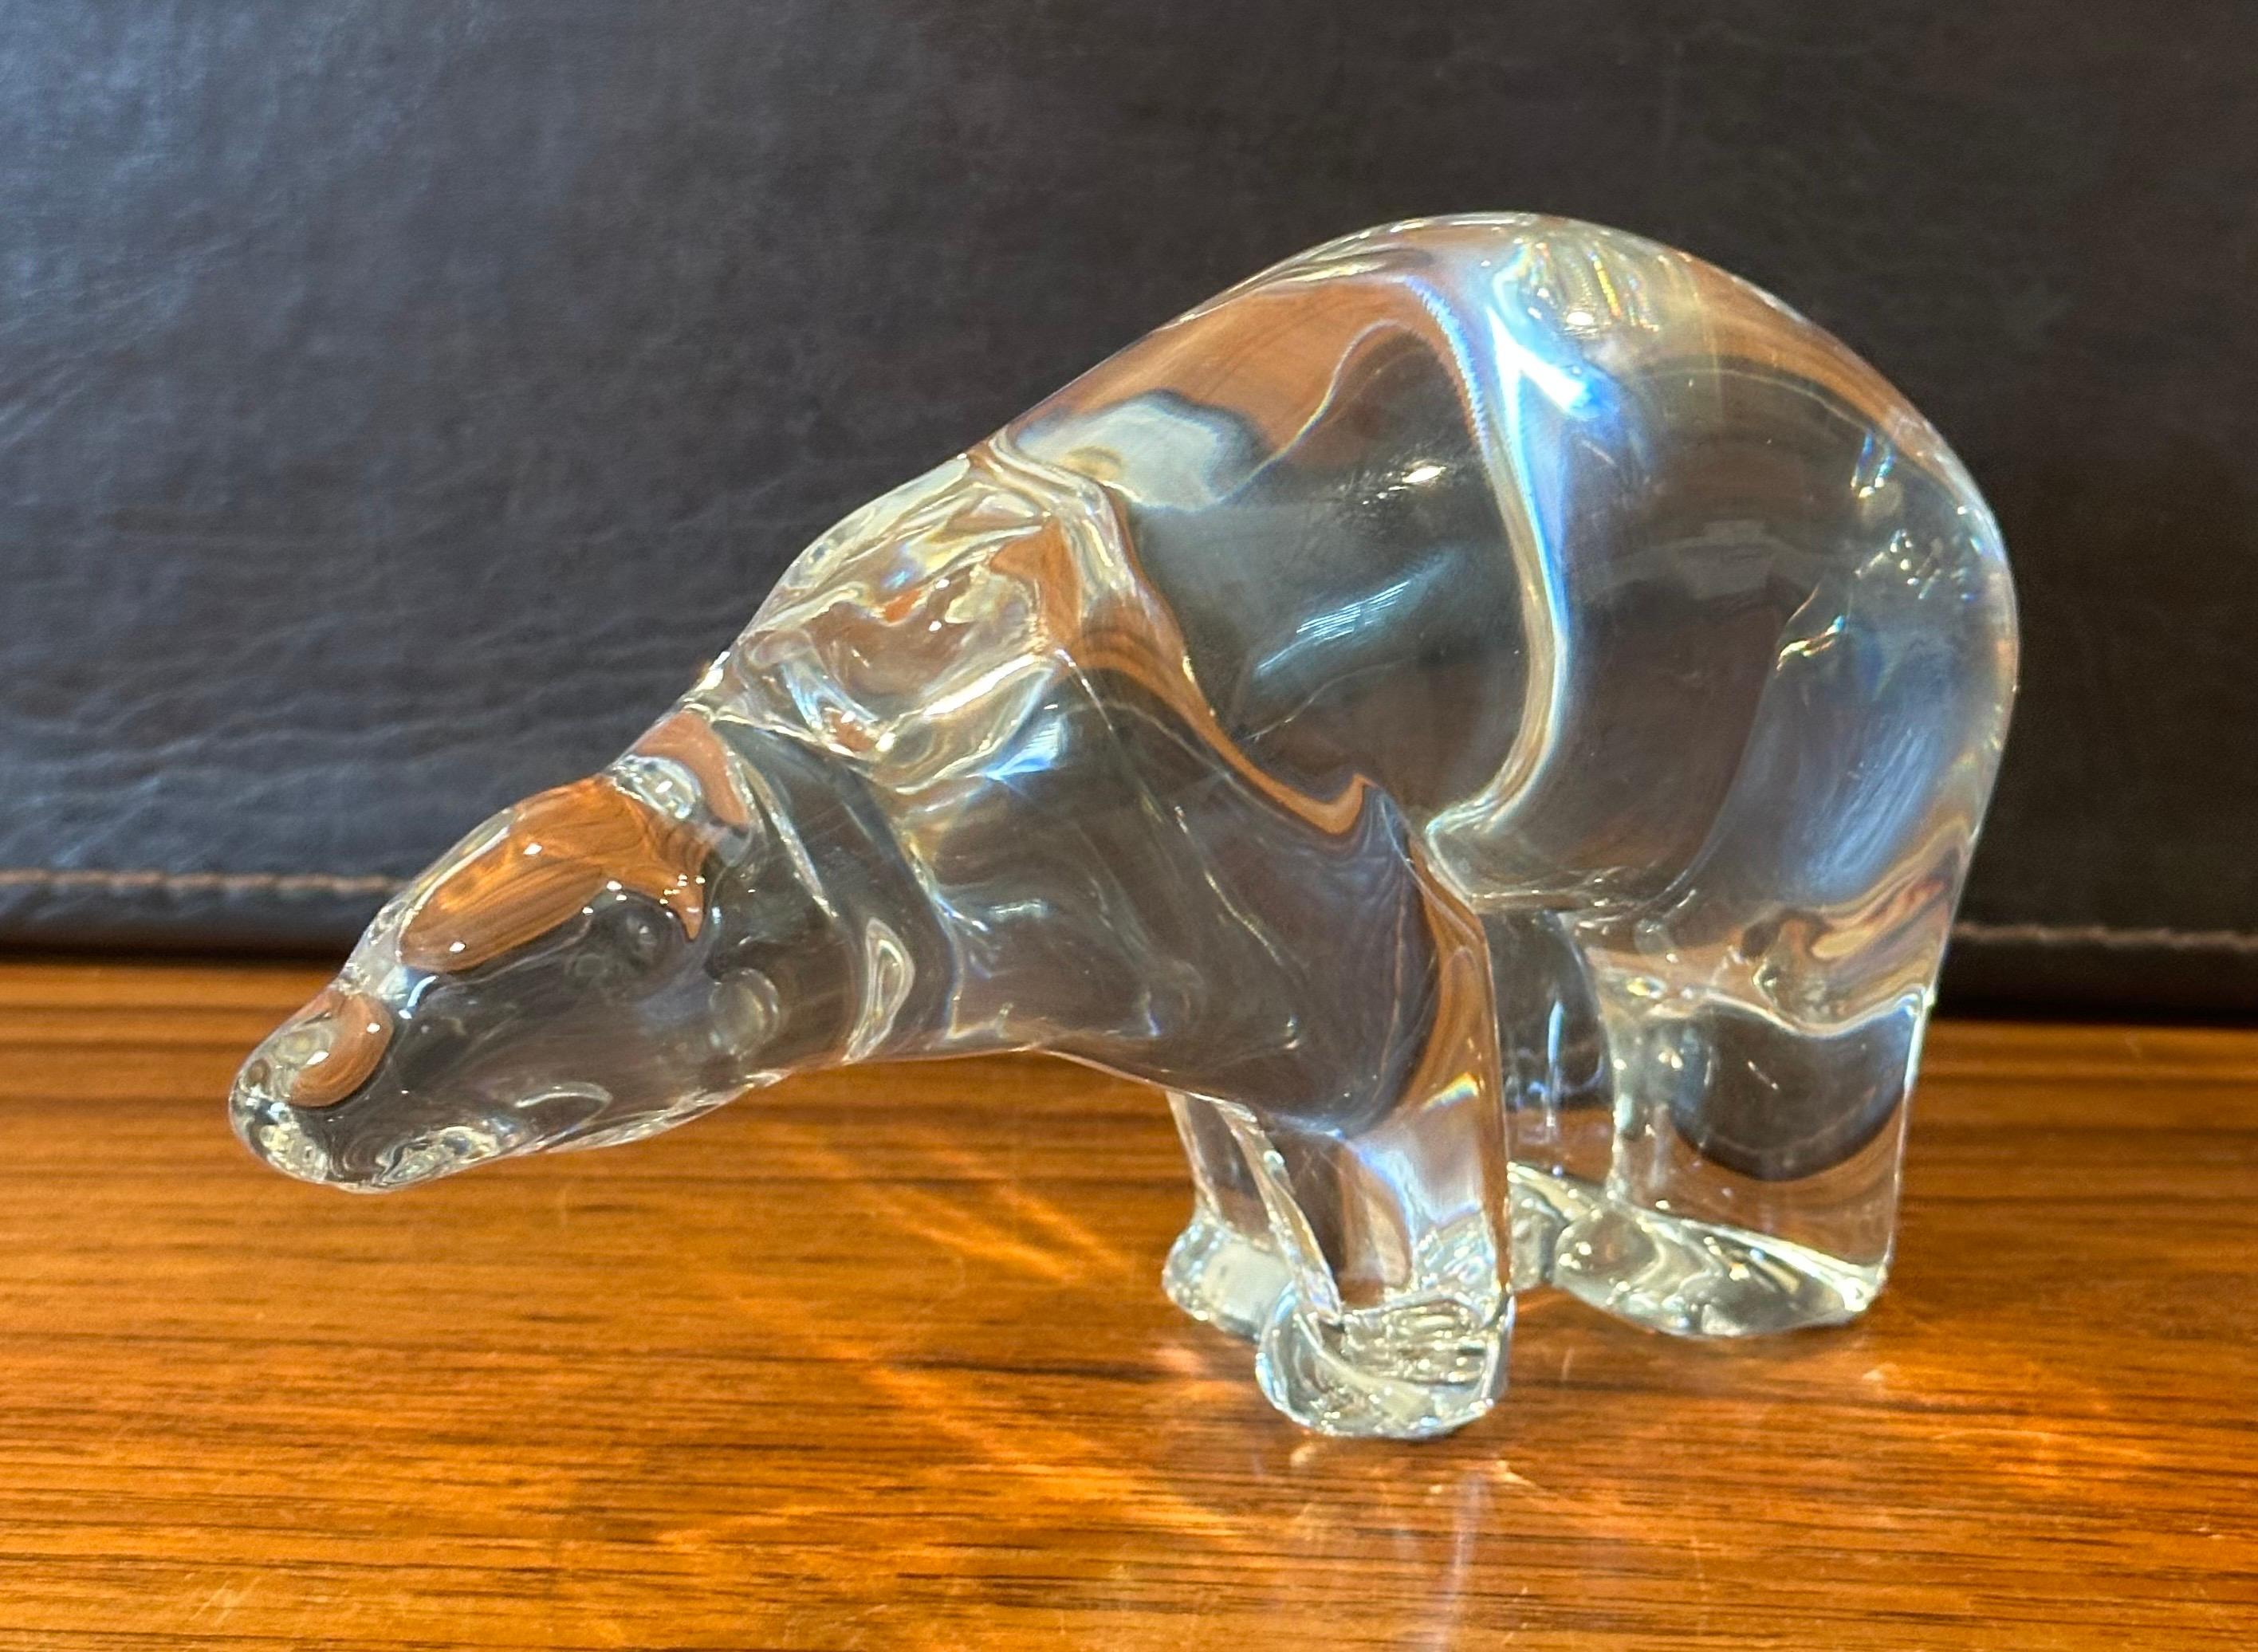 Stylized Polar Bear Sculpture by Baccarat For Sale 1